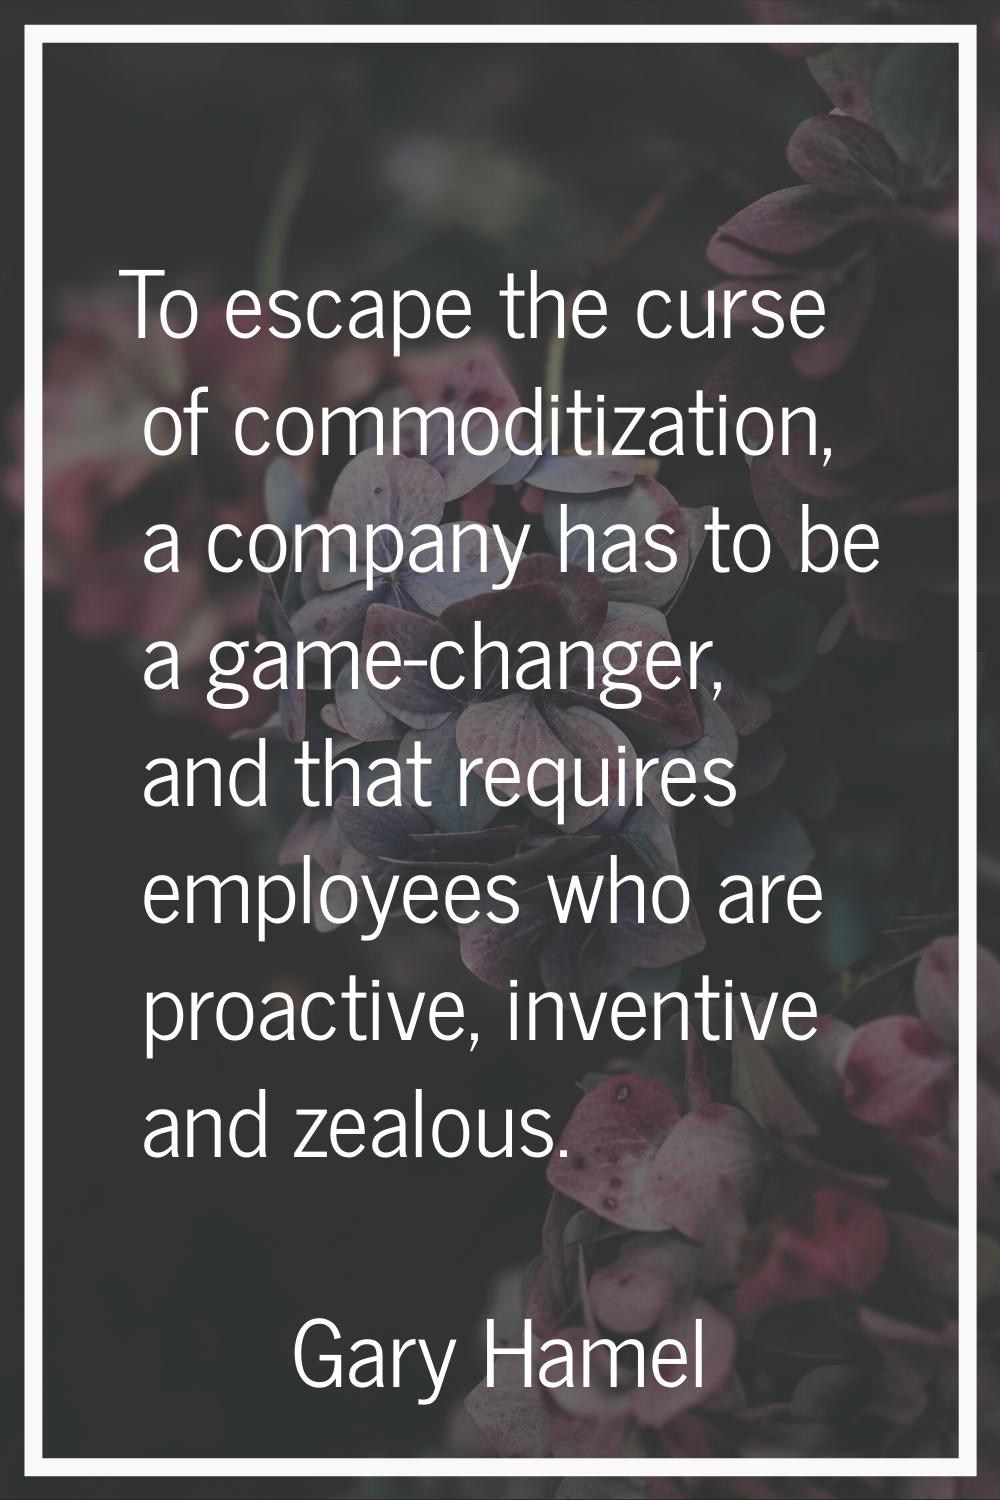 To escape the curse of commoditization, a company has to be a game-changer, and that requires emplo